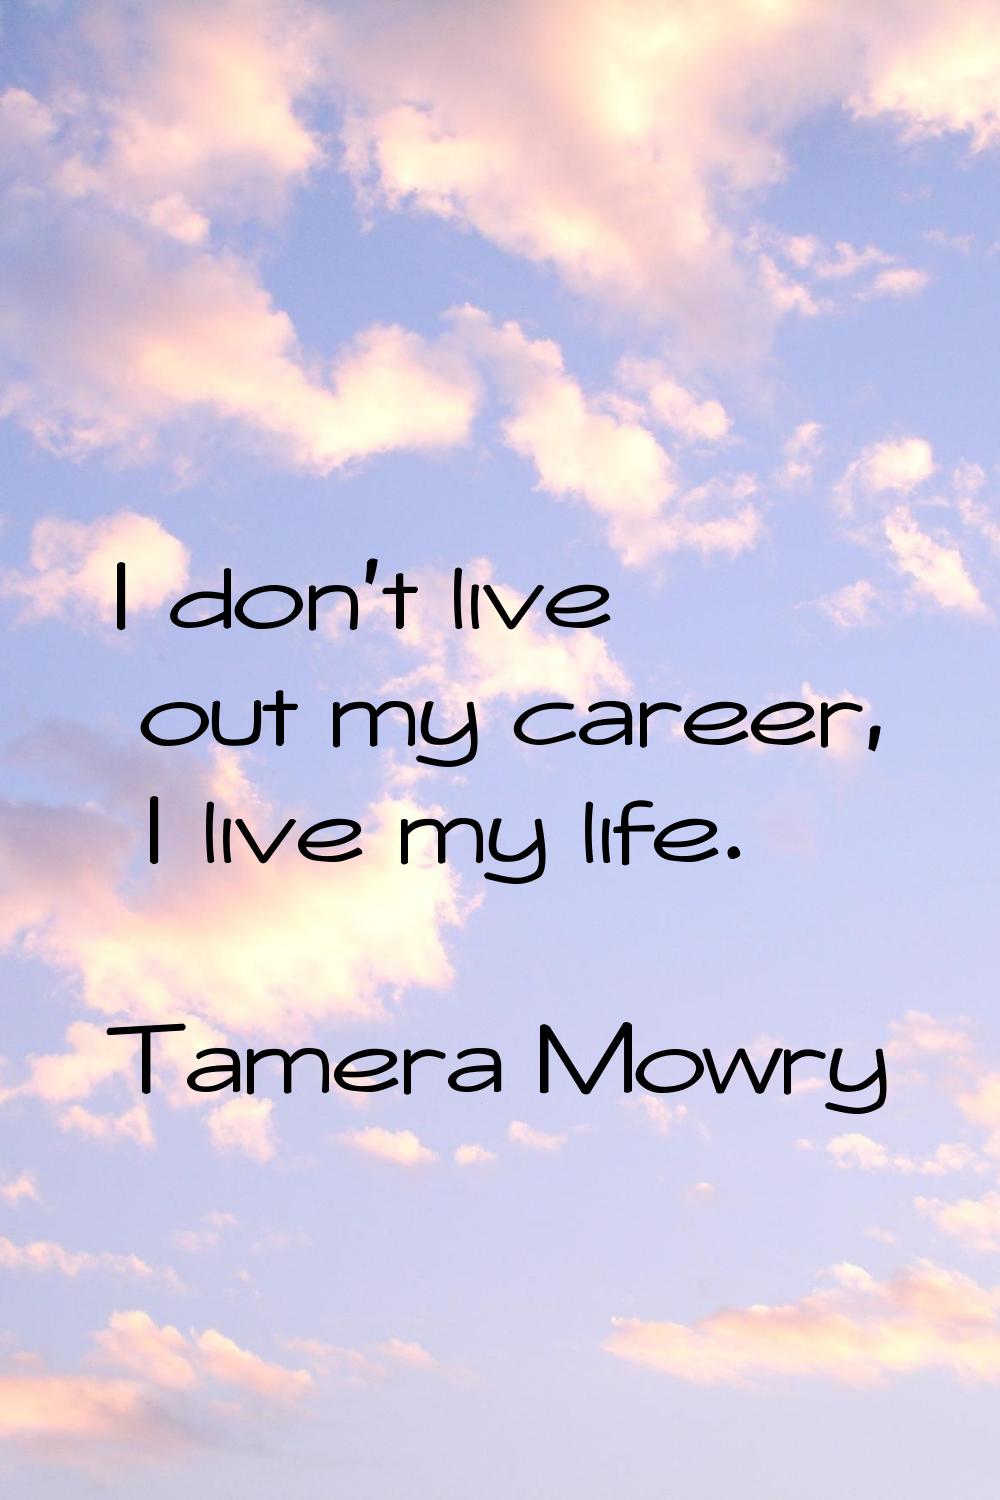 I don't live out my career, I live my life.